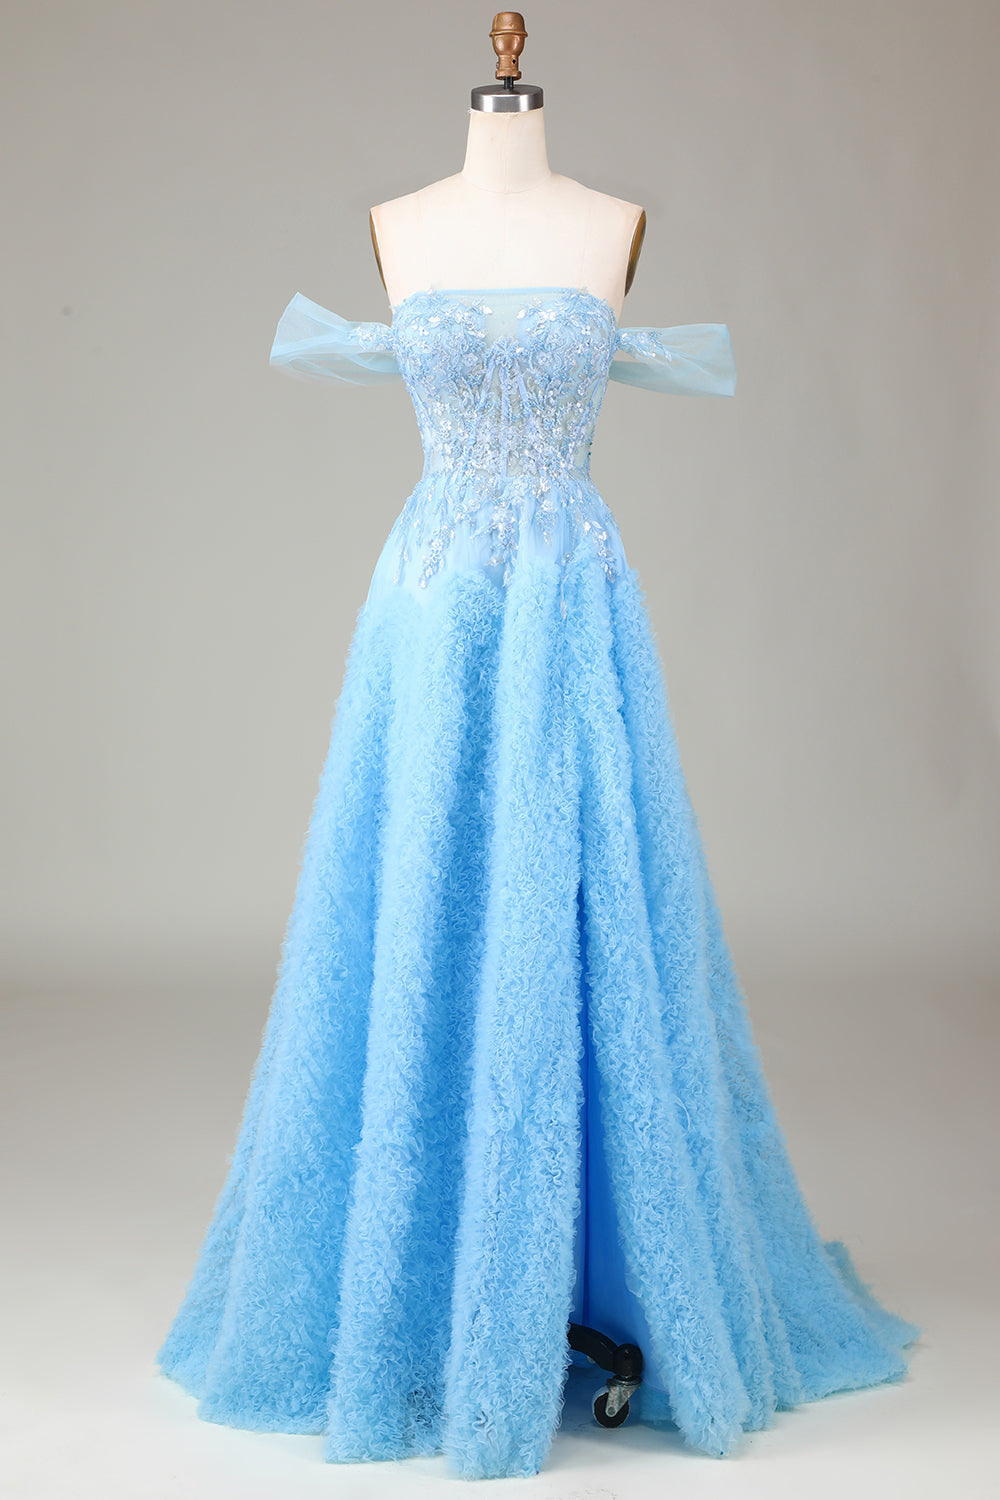 Sparkly Blue Corset Off the Shoulder A-Line Long Formal Dress with Lace